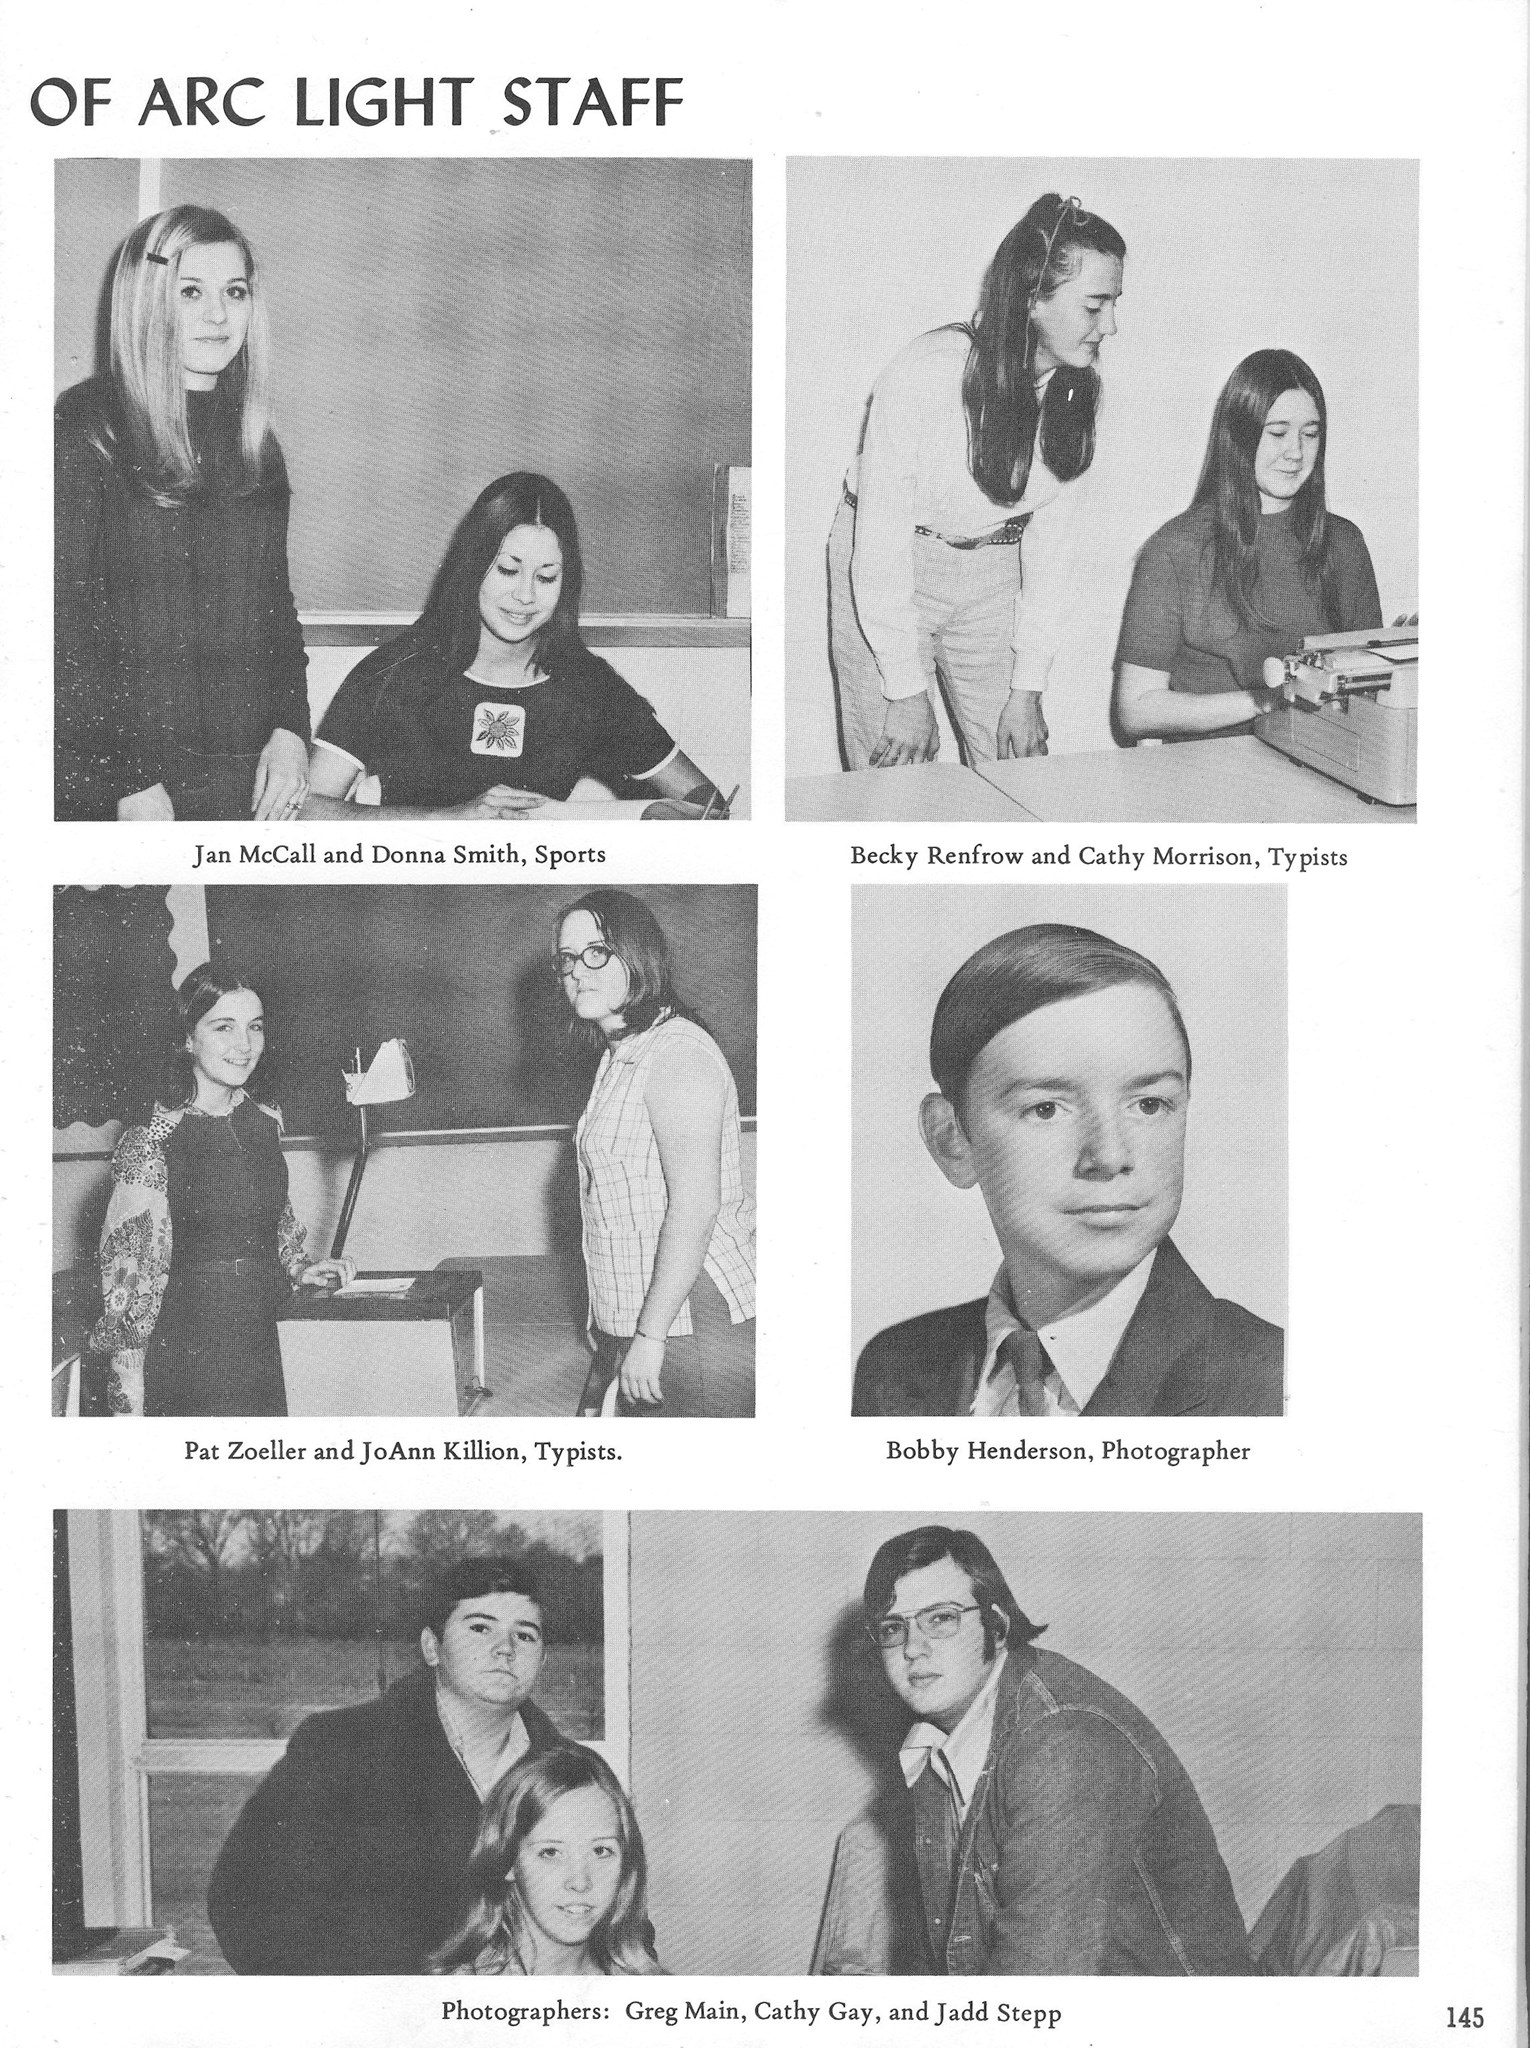 ../../../Images/Large/1972/Arclight-1972-pg0145.jpg